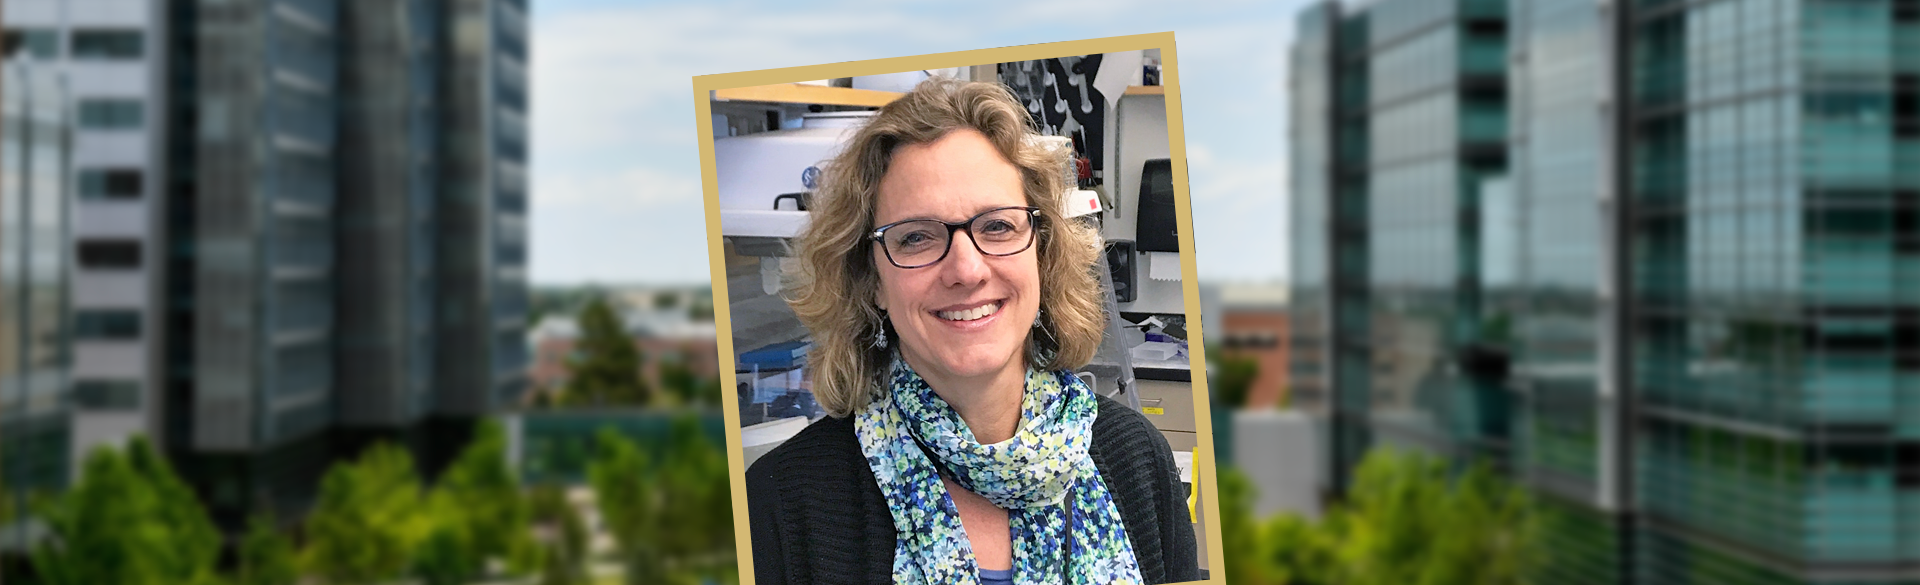 Heide Ford, PhD | Chair of the Department of Pharmacology | University of Colorado School of Medicine